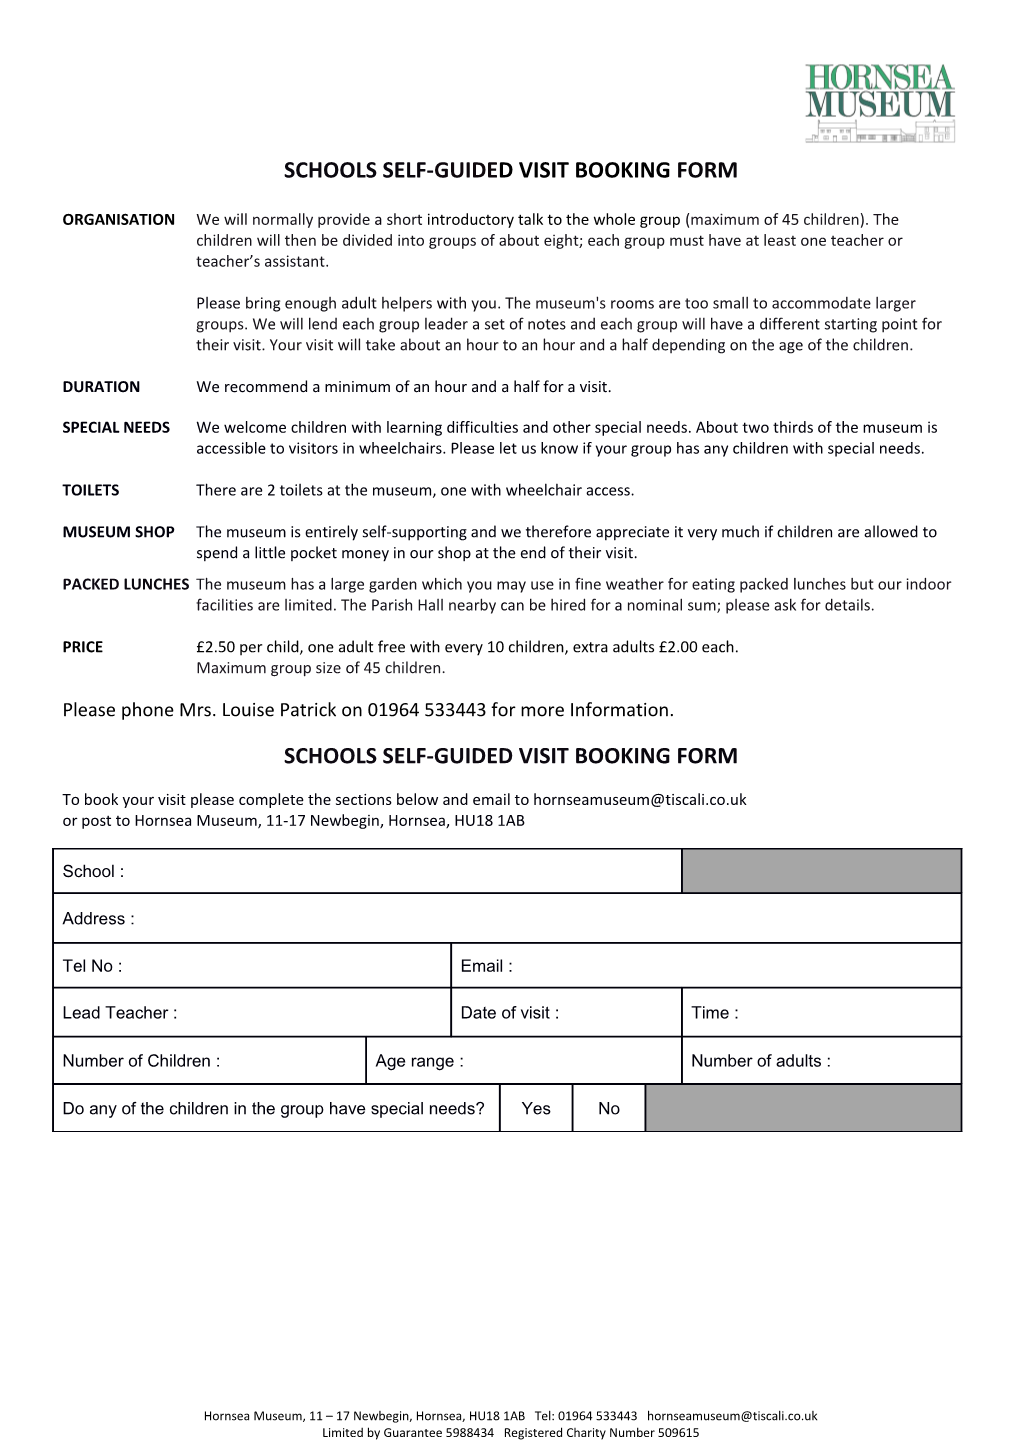 Schools Self-Guided Visit Booking Form